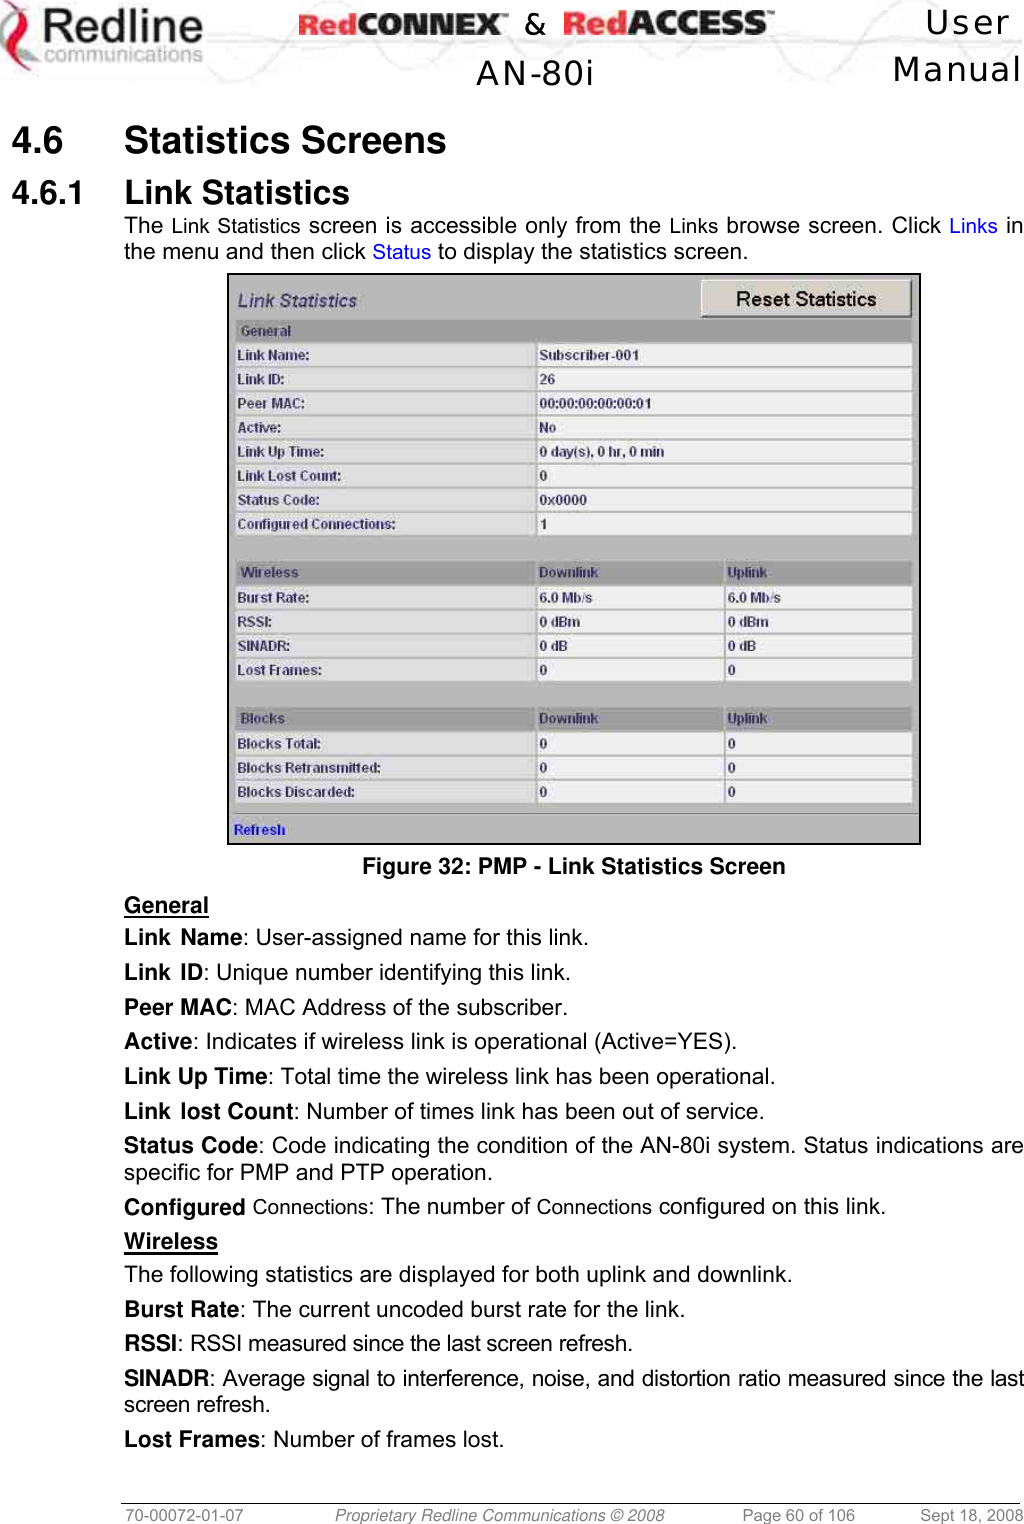    &amp;  User  AN-80i Manual  70-00072-01-07  Proprietary Redline Communications © 2008  Page 60 of 106  Sept 18, 2008  4.6 Statistics Screens 4.6.1 Link Statistics The Link Statistics screen is accessible only from the Links browse screen. Click Links in the menu and then click Status to display the statistics screen.   Figure 32: PMP - Link Statistics Screen General Link Name: User-assigned name for this link. Link ID: Unique number identifying this link. Peer MAC: MAC Address of the subscriber. Active: Indicates if wireless link is operational (Active=YES). Link Up Time: Total time the wireless link has been operational. Link lost Count: Number of times link has been out of service. Status Code: Code indicating the condition of the AN-80i system. Status indications are specific for PMP and PTP operation.  Configured Connections: The number of Connections configured on this link. Wireless The following statistics are displayed for both uplink and downlink. Burst Rate: The current uncoded burst rate for the link. RSSI: RSSI measured since the last screen refresh. SINADR: Average signal to interference, noise, and distortion ratio measured since the last screen refresh. Lost Frames: Number of frames lost. 